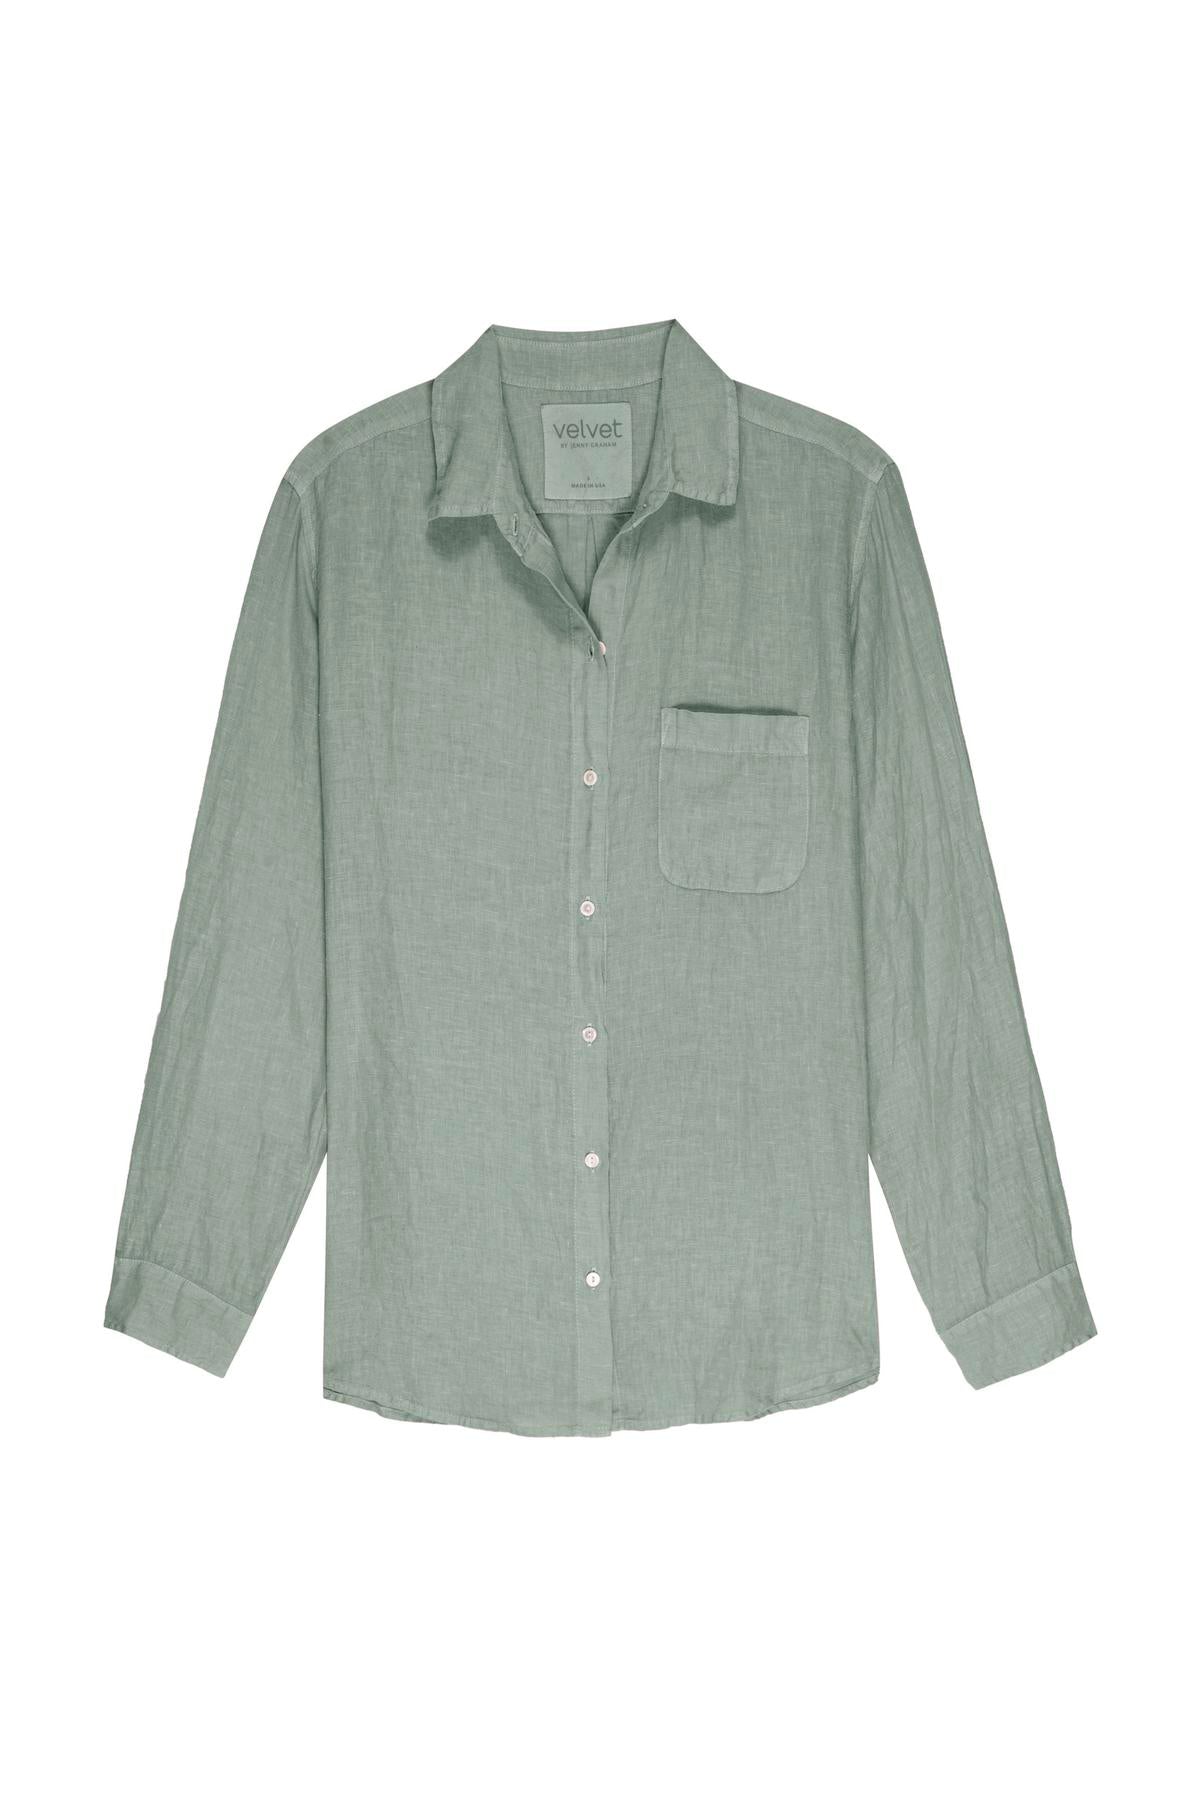 a MULHOLLAND SHIRT by Velvet by Jenny Graham with a button down collar.-26293076164801